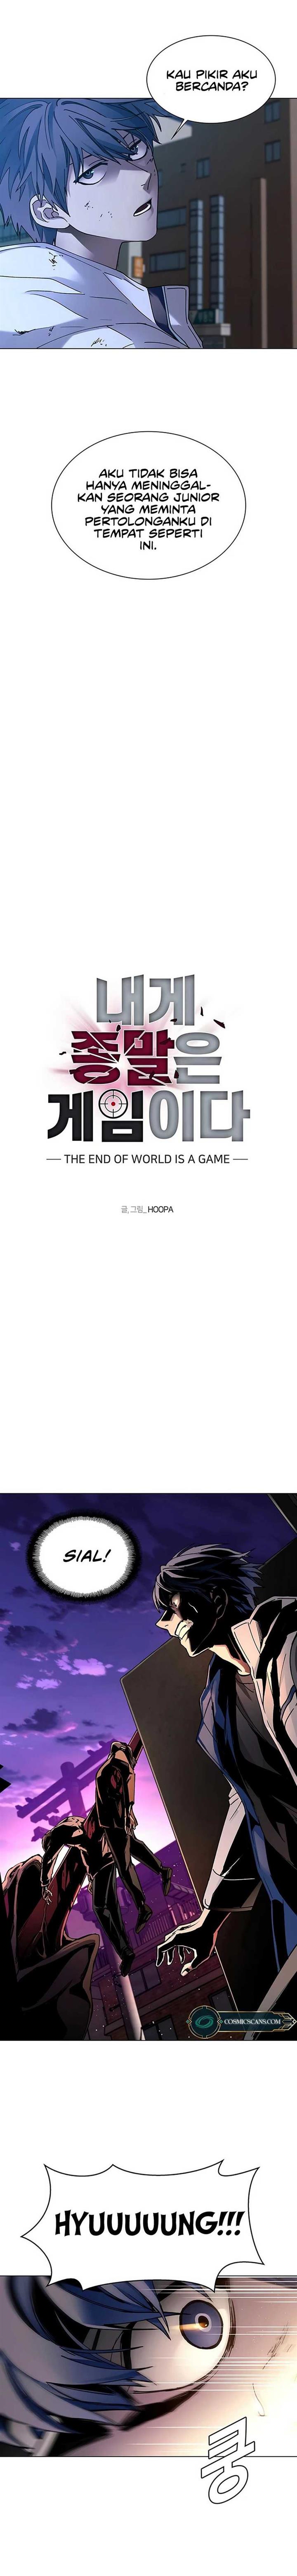 The End of the World is Just a Game to Me Chapter 9